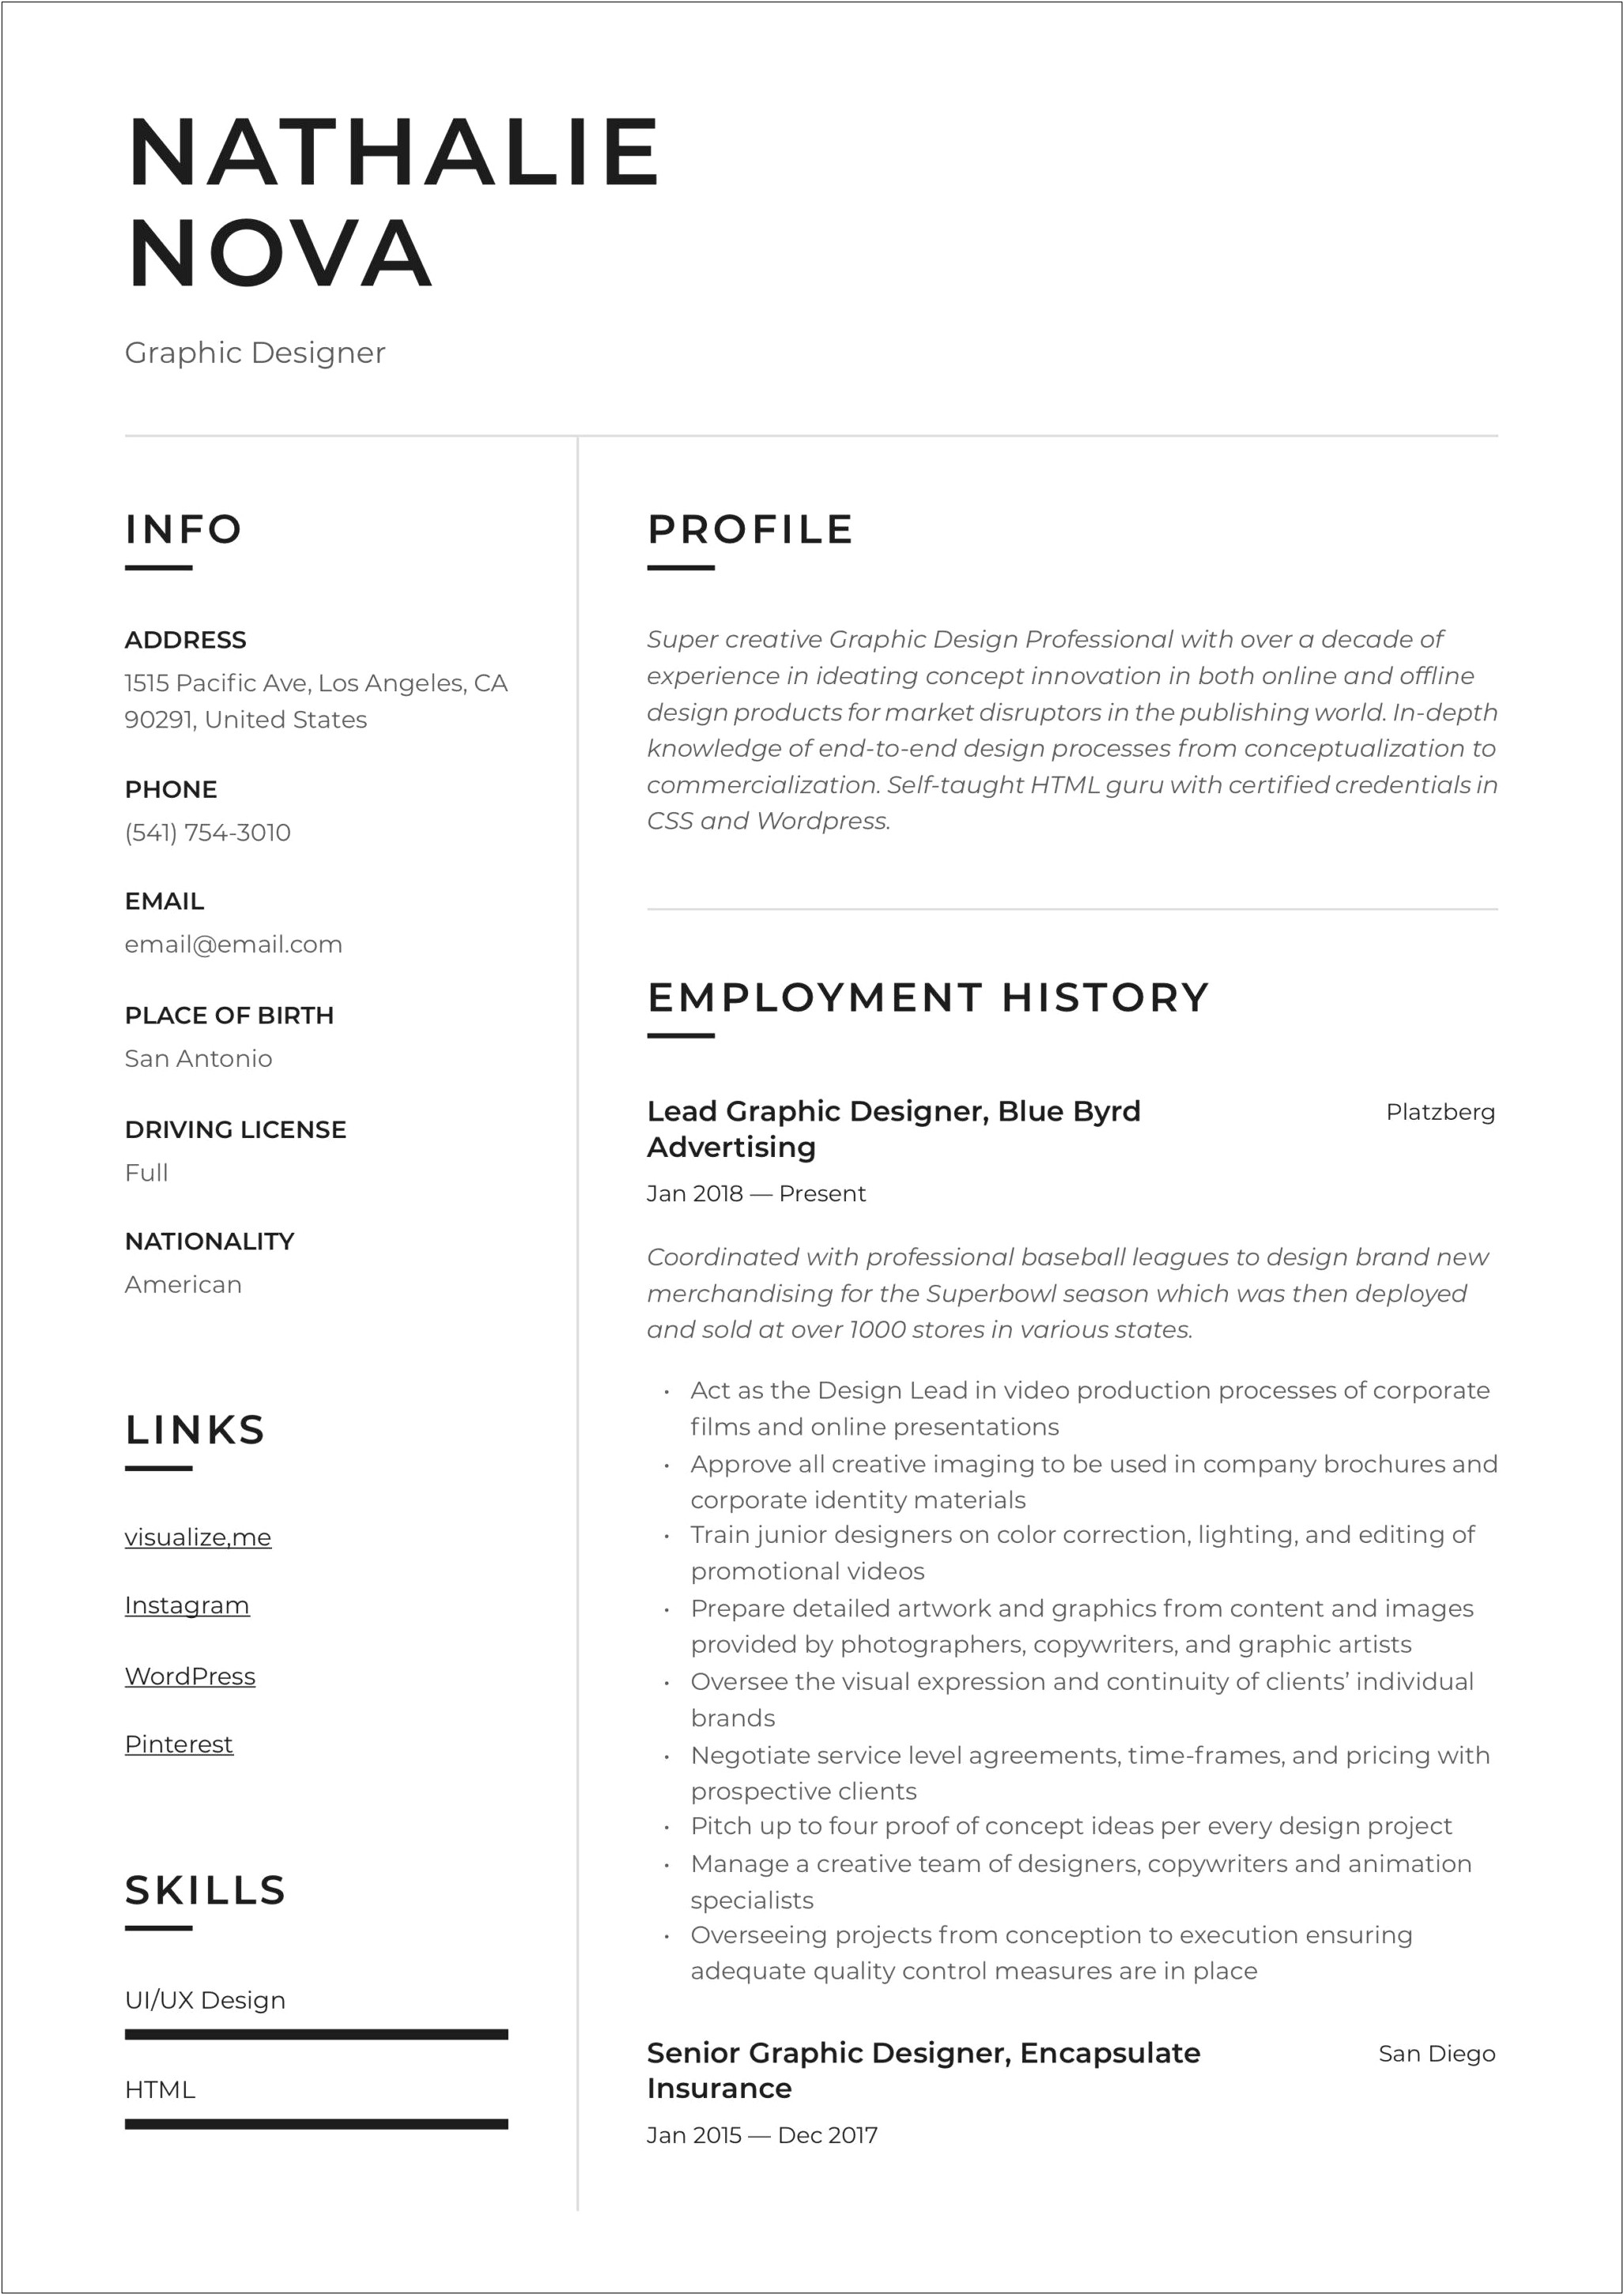 Graphic Design Position Resume Summary With Little Experience